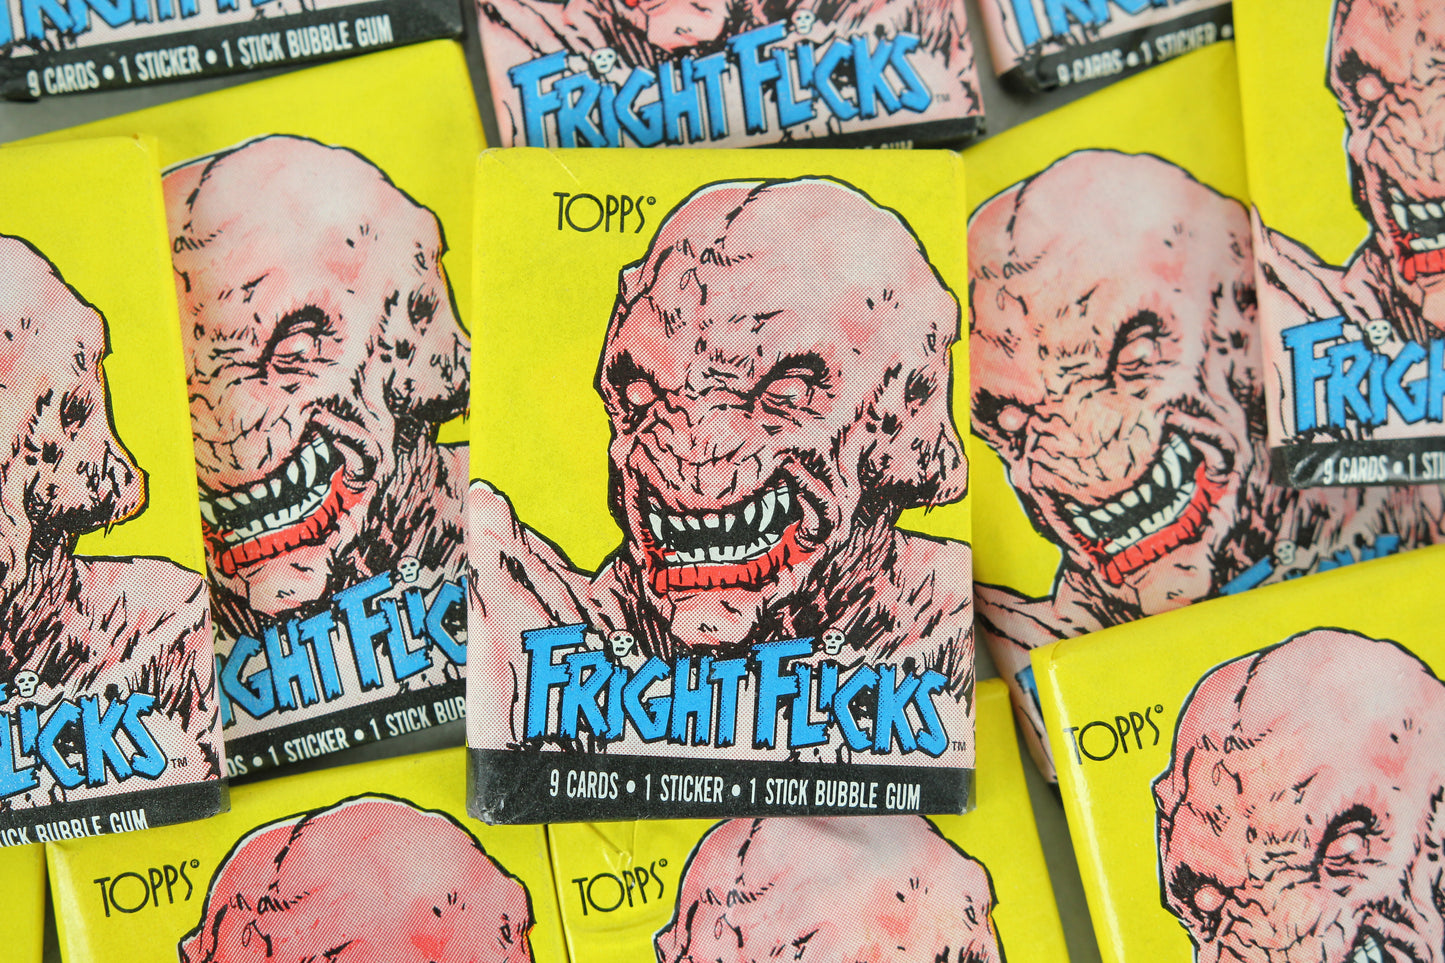 Topps Fright Flicks Collectible Trading Cards, One Wax Pack, Pumpkinhead, 1988